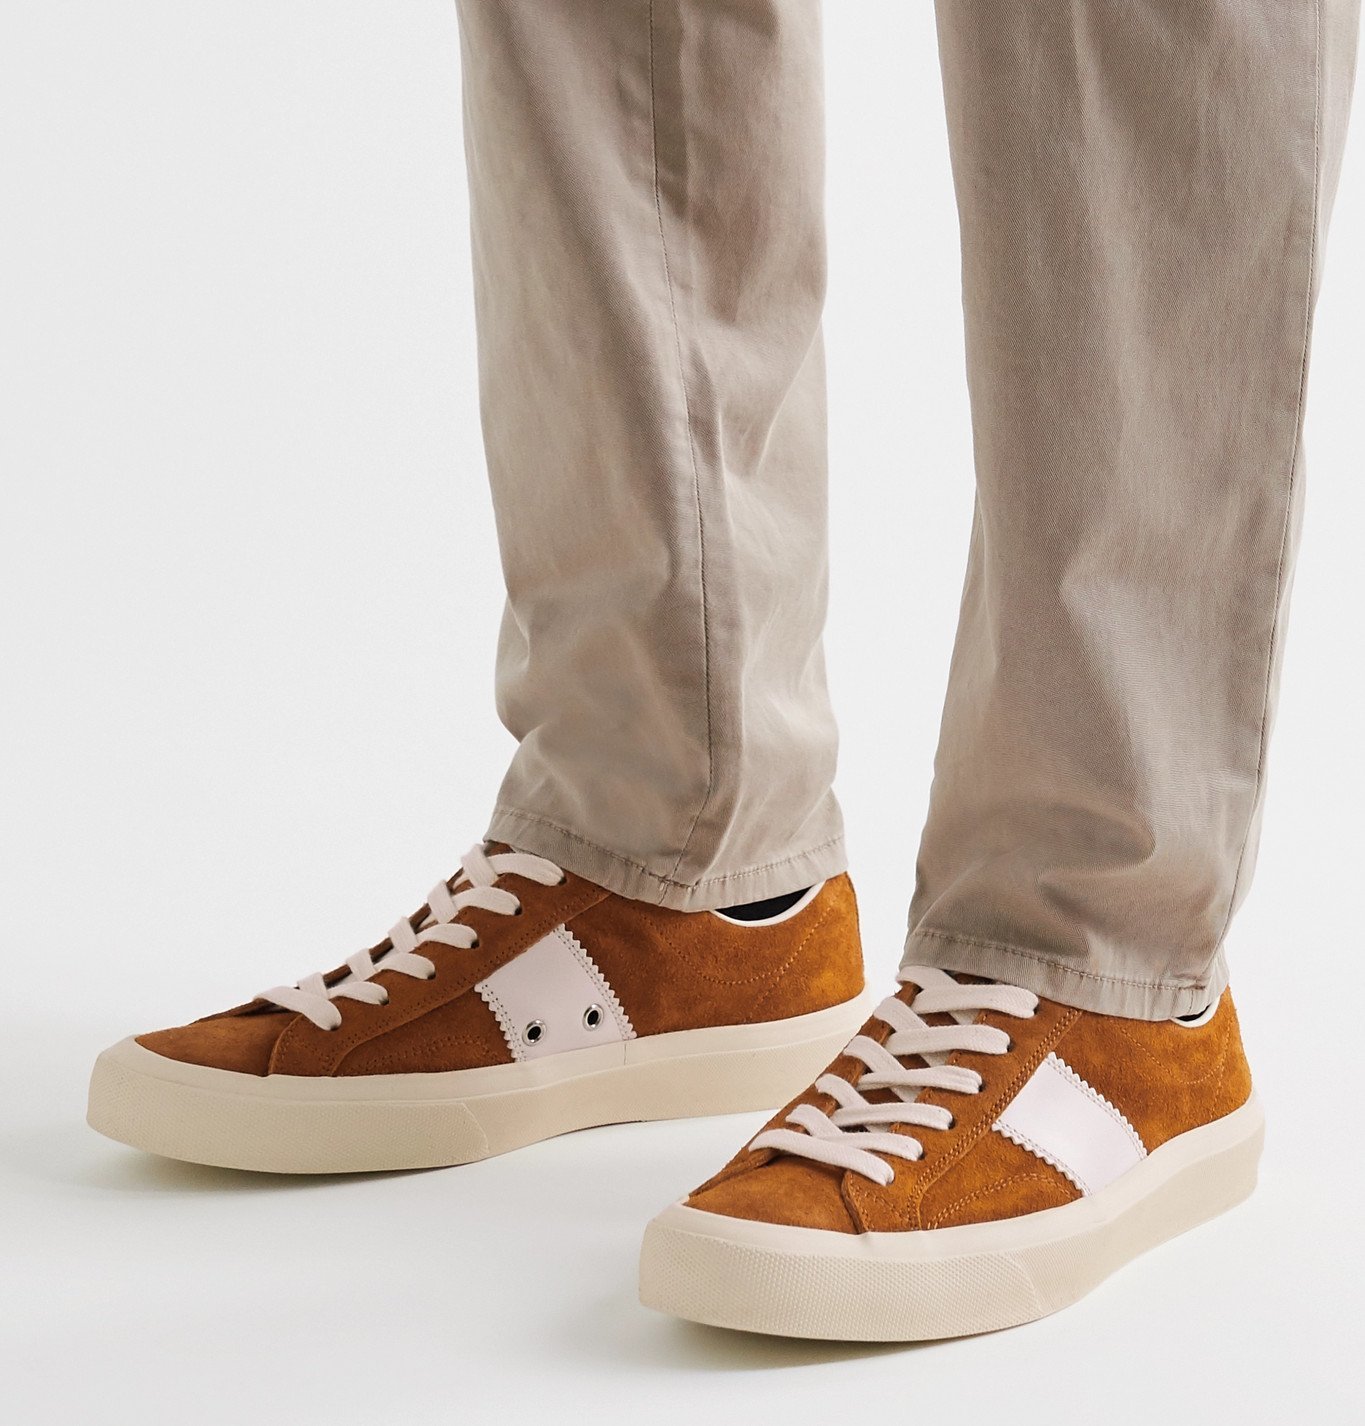 TOM FORD - Cambridge Leather-Trimmed Suede Sneakers - Brown TOM FORD